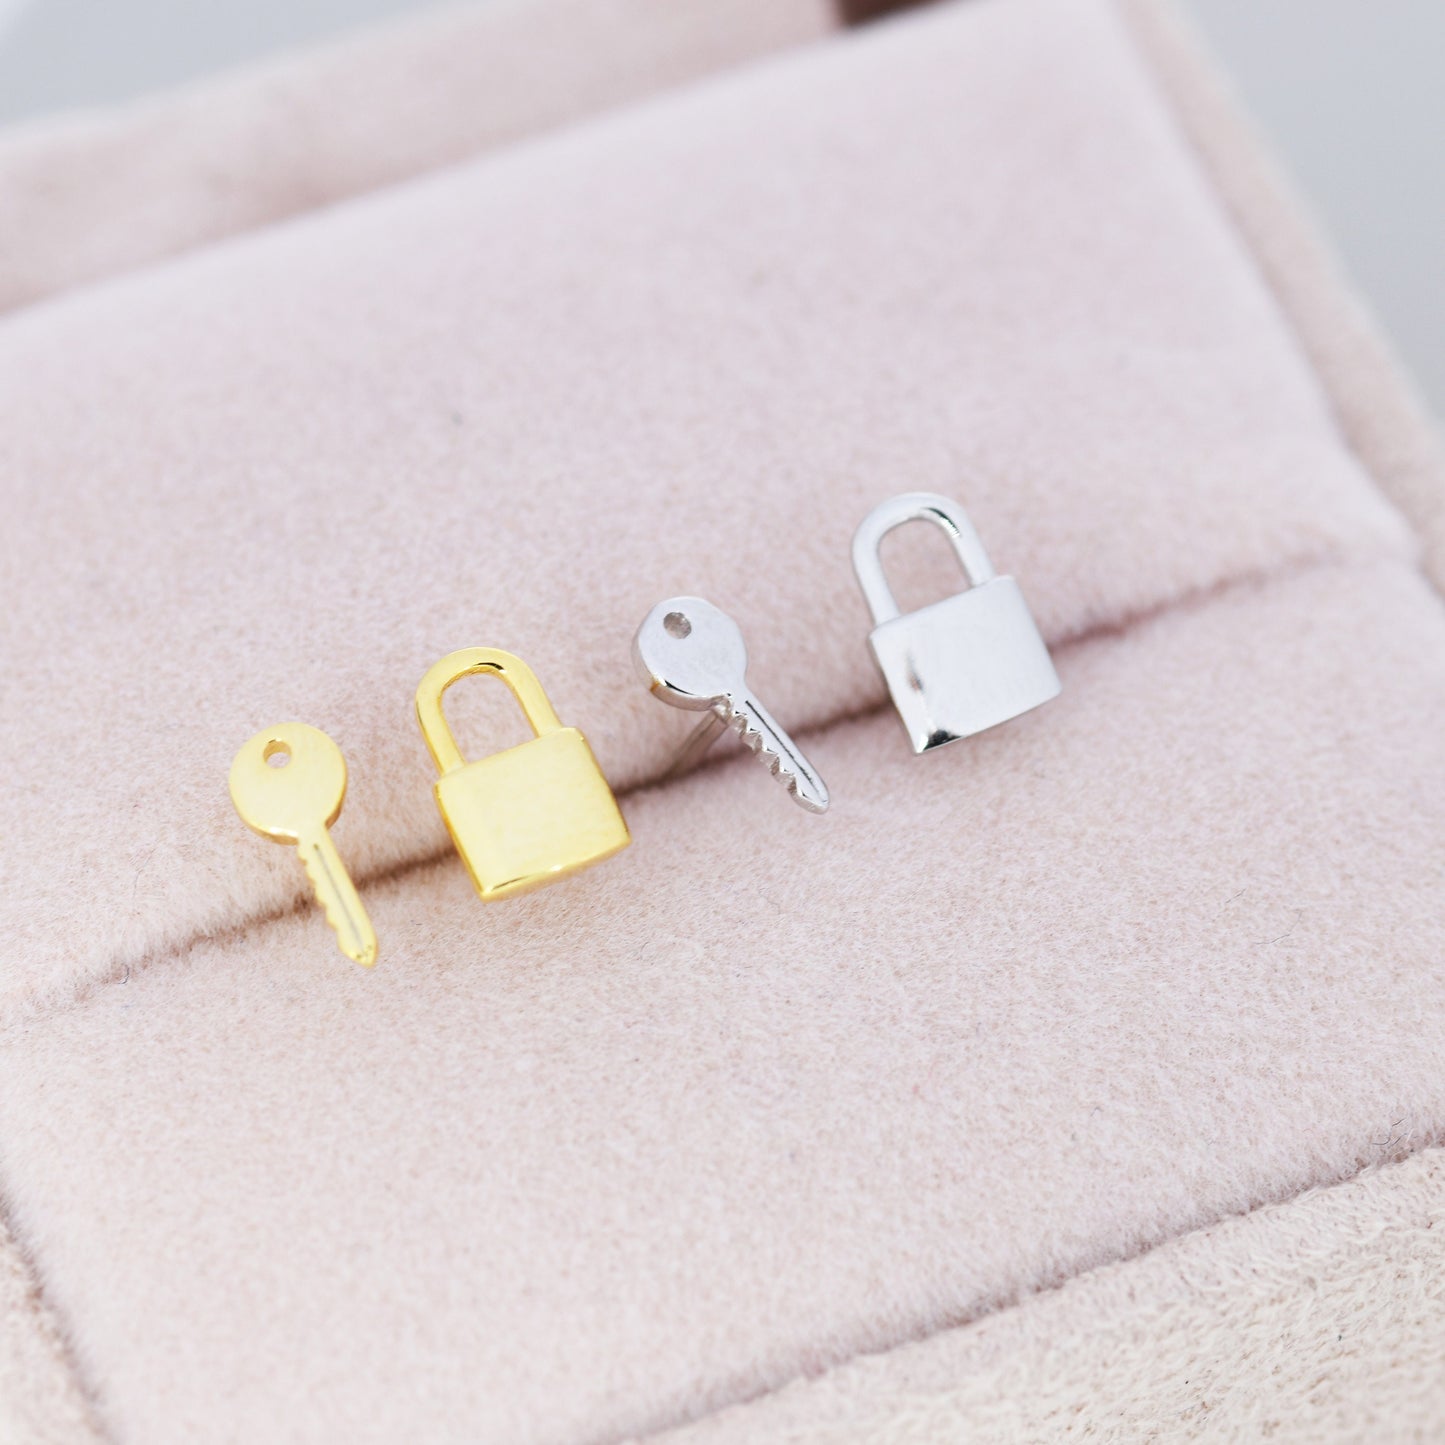 Tiny Key and Lock Mismatched Stud Earrings in Sterling Silver, Silver or Gold, Stacking Earrings